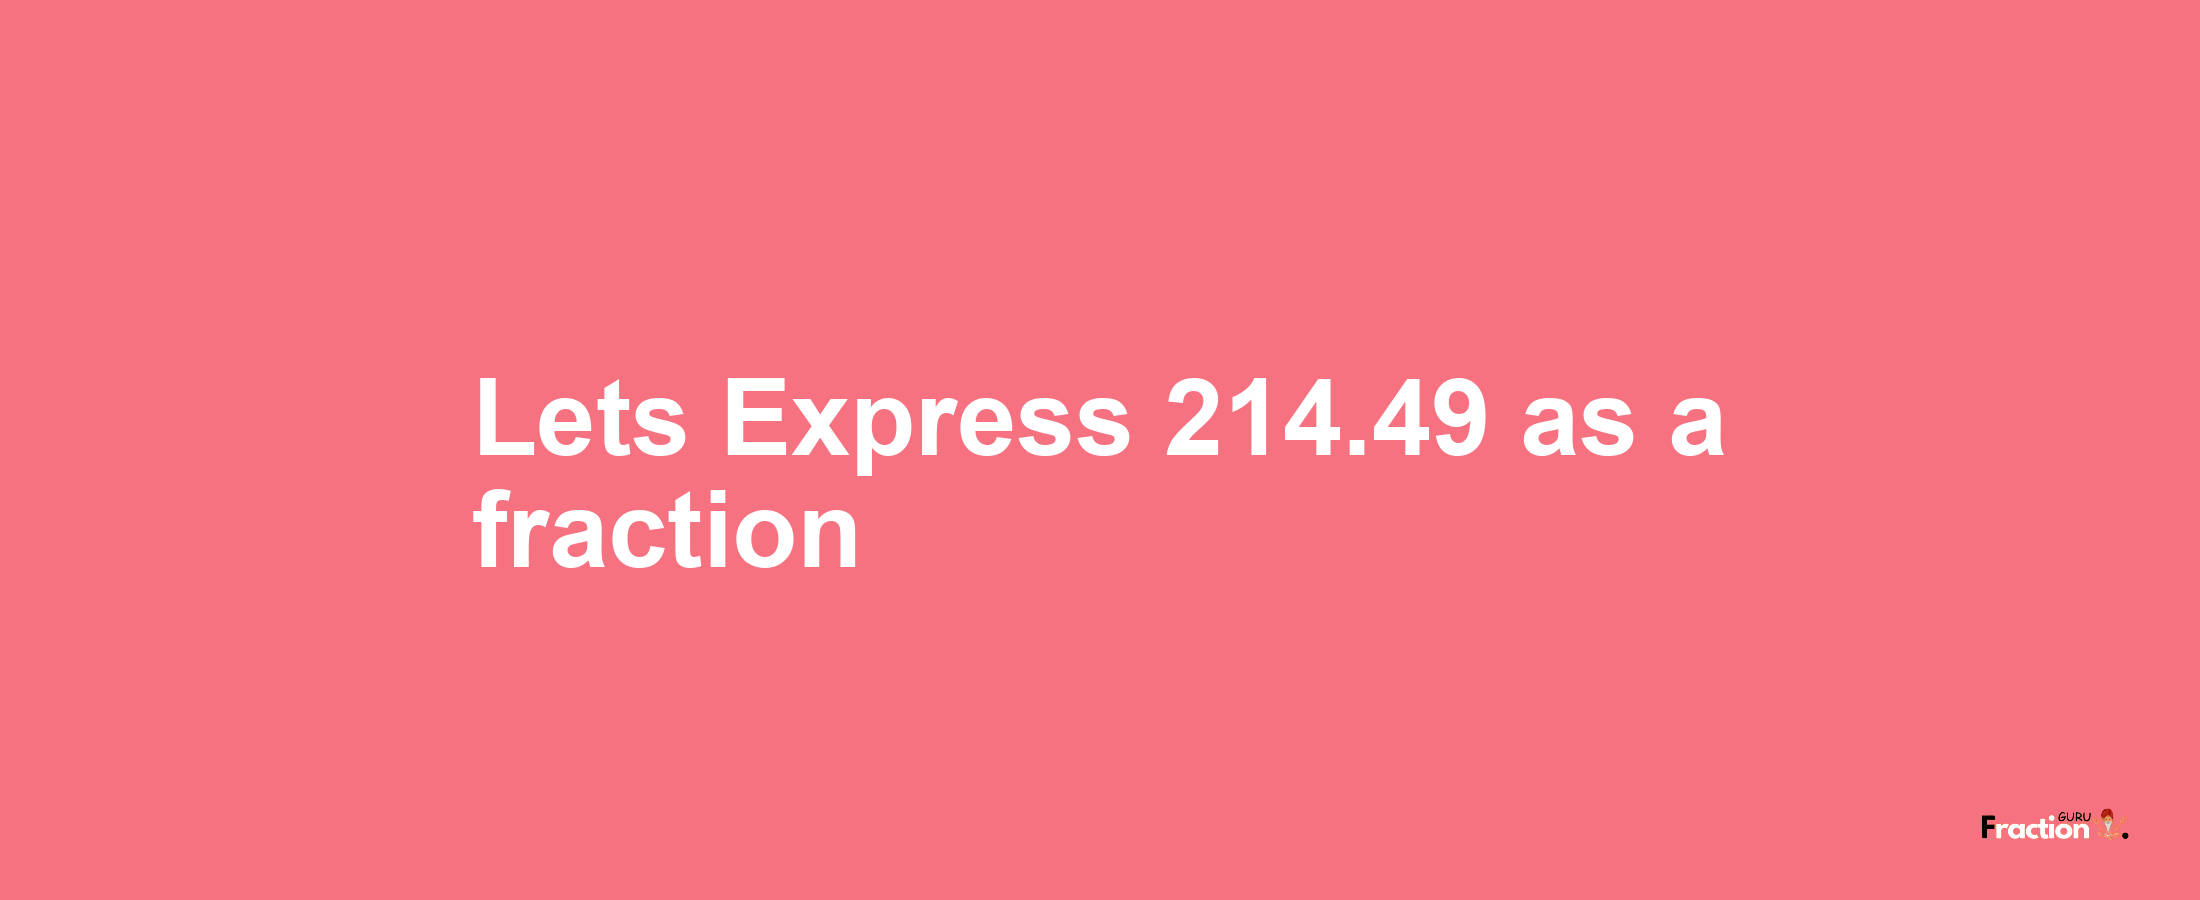 Lets Express 214.49 as afraction